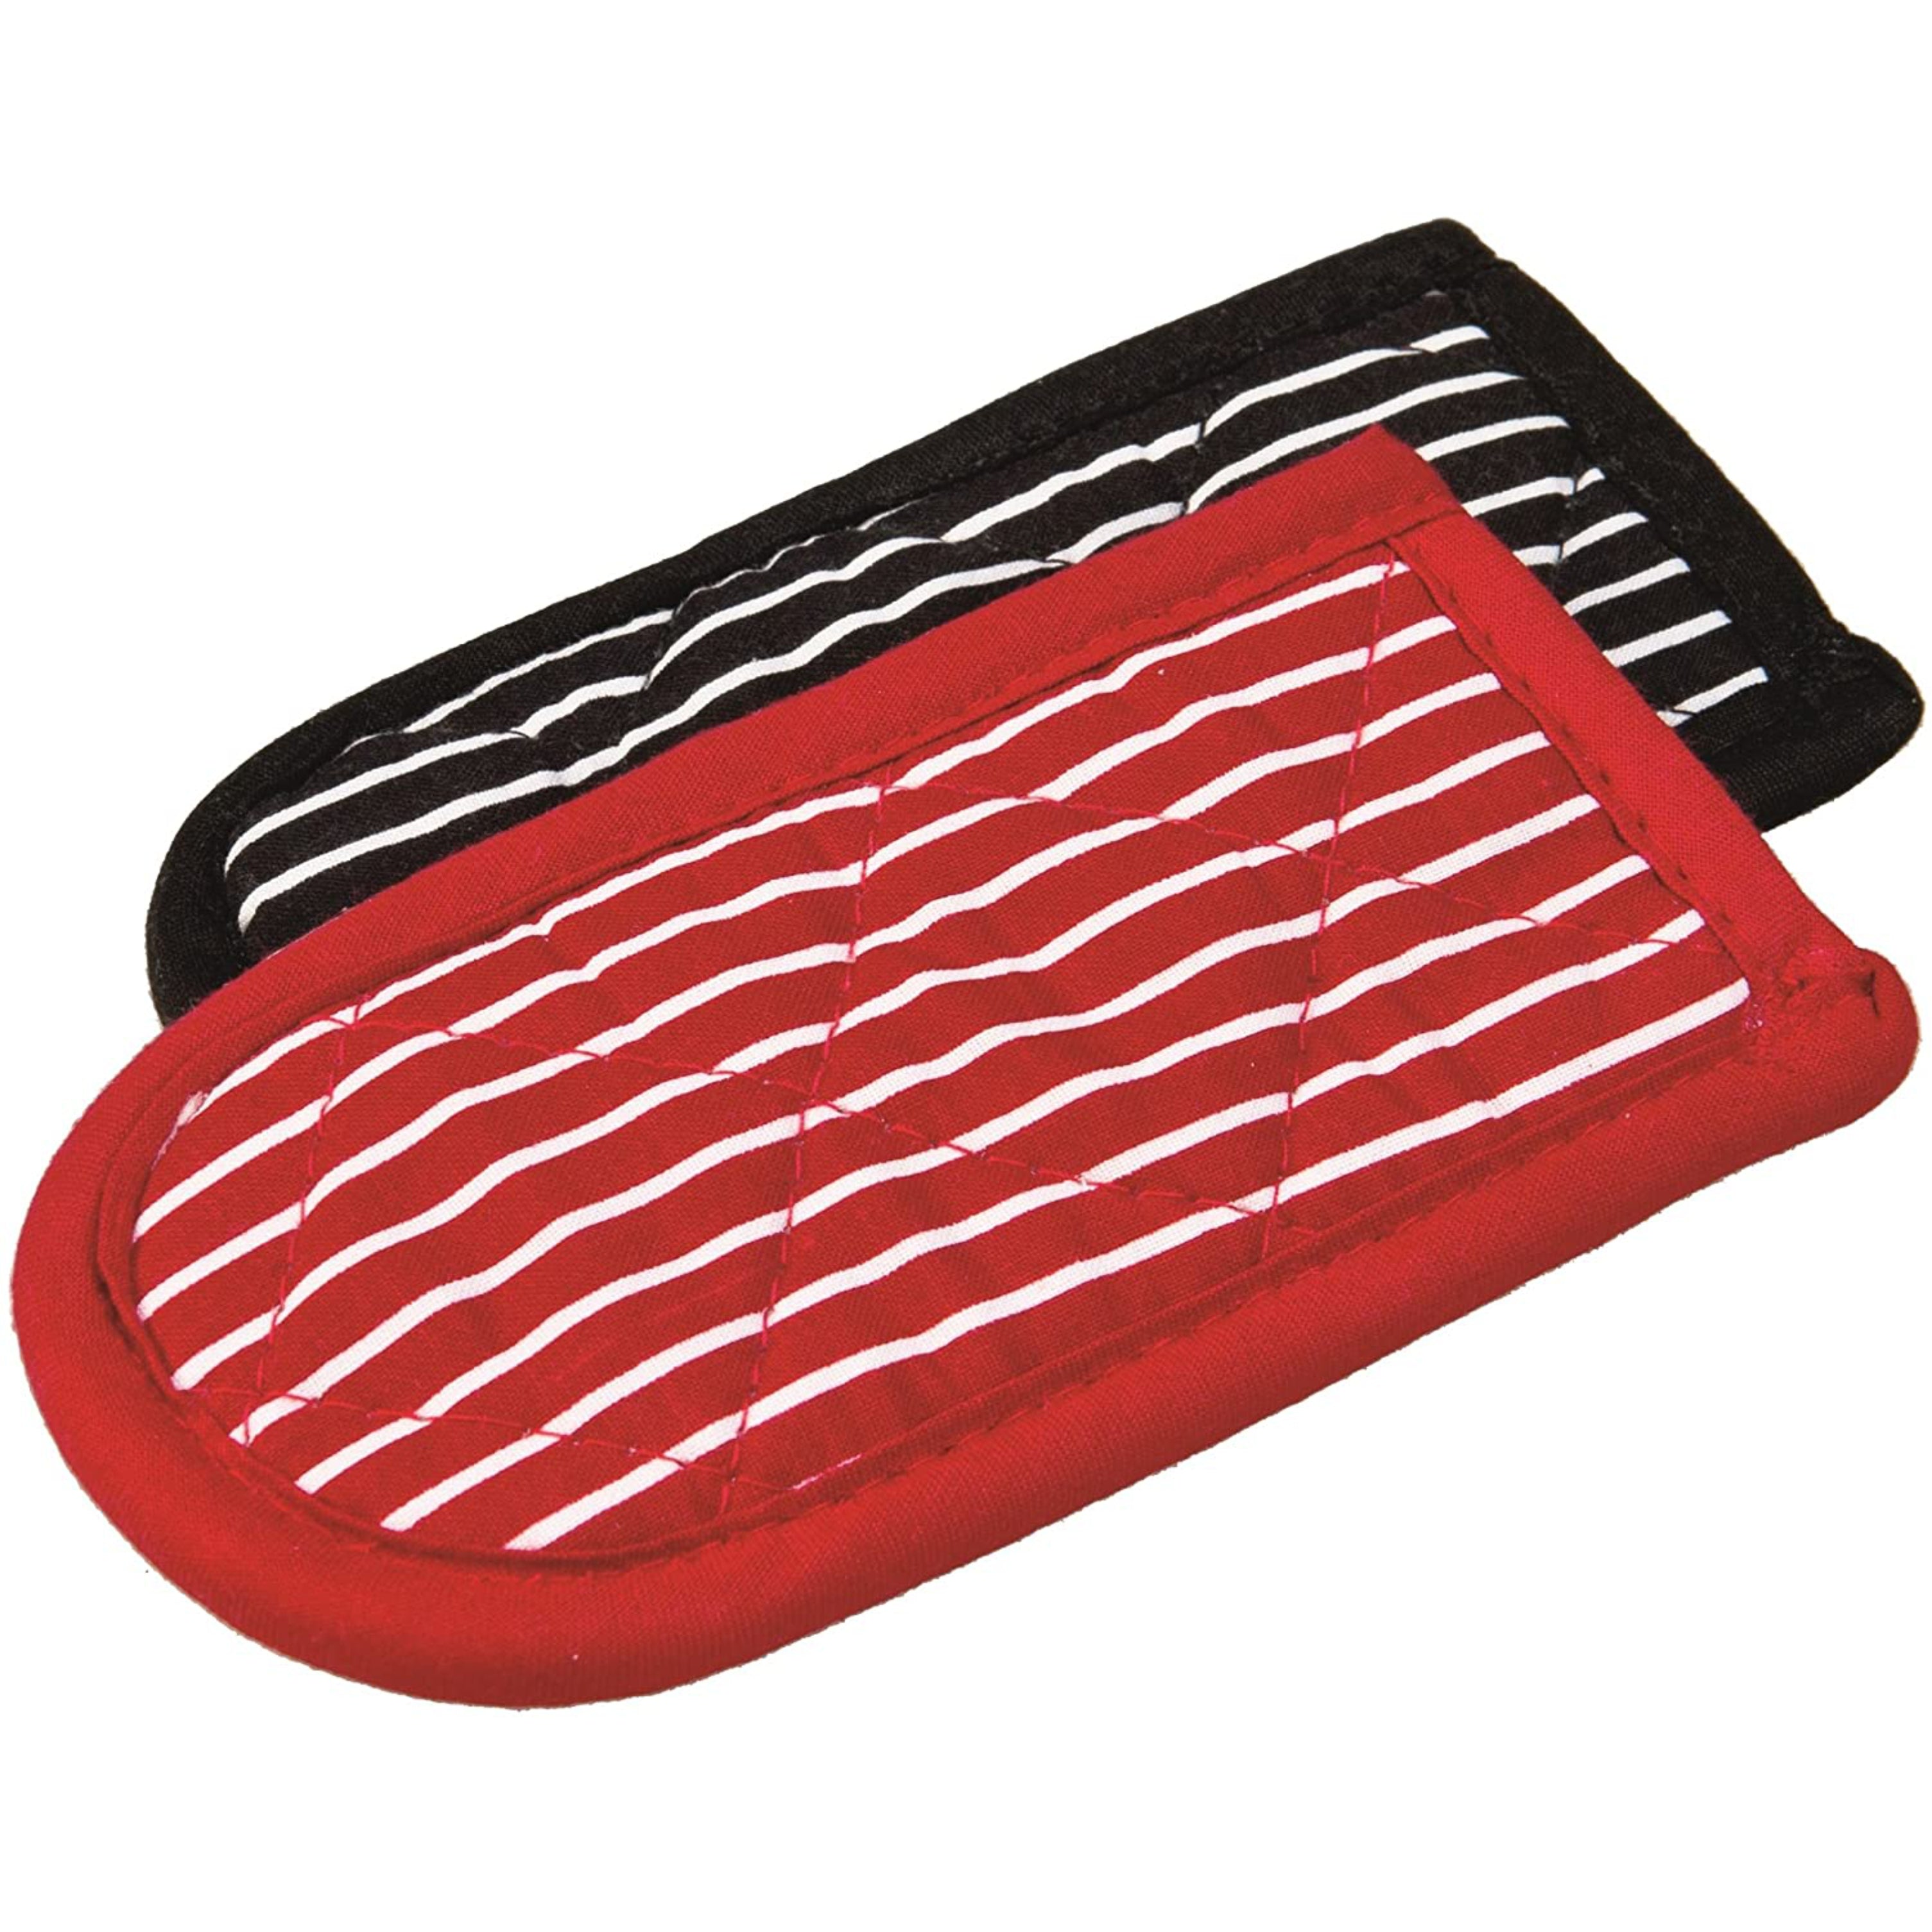 Lodge Striped Hot Handle Holders/Mitts – Set of 2